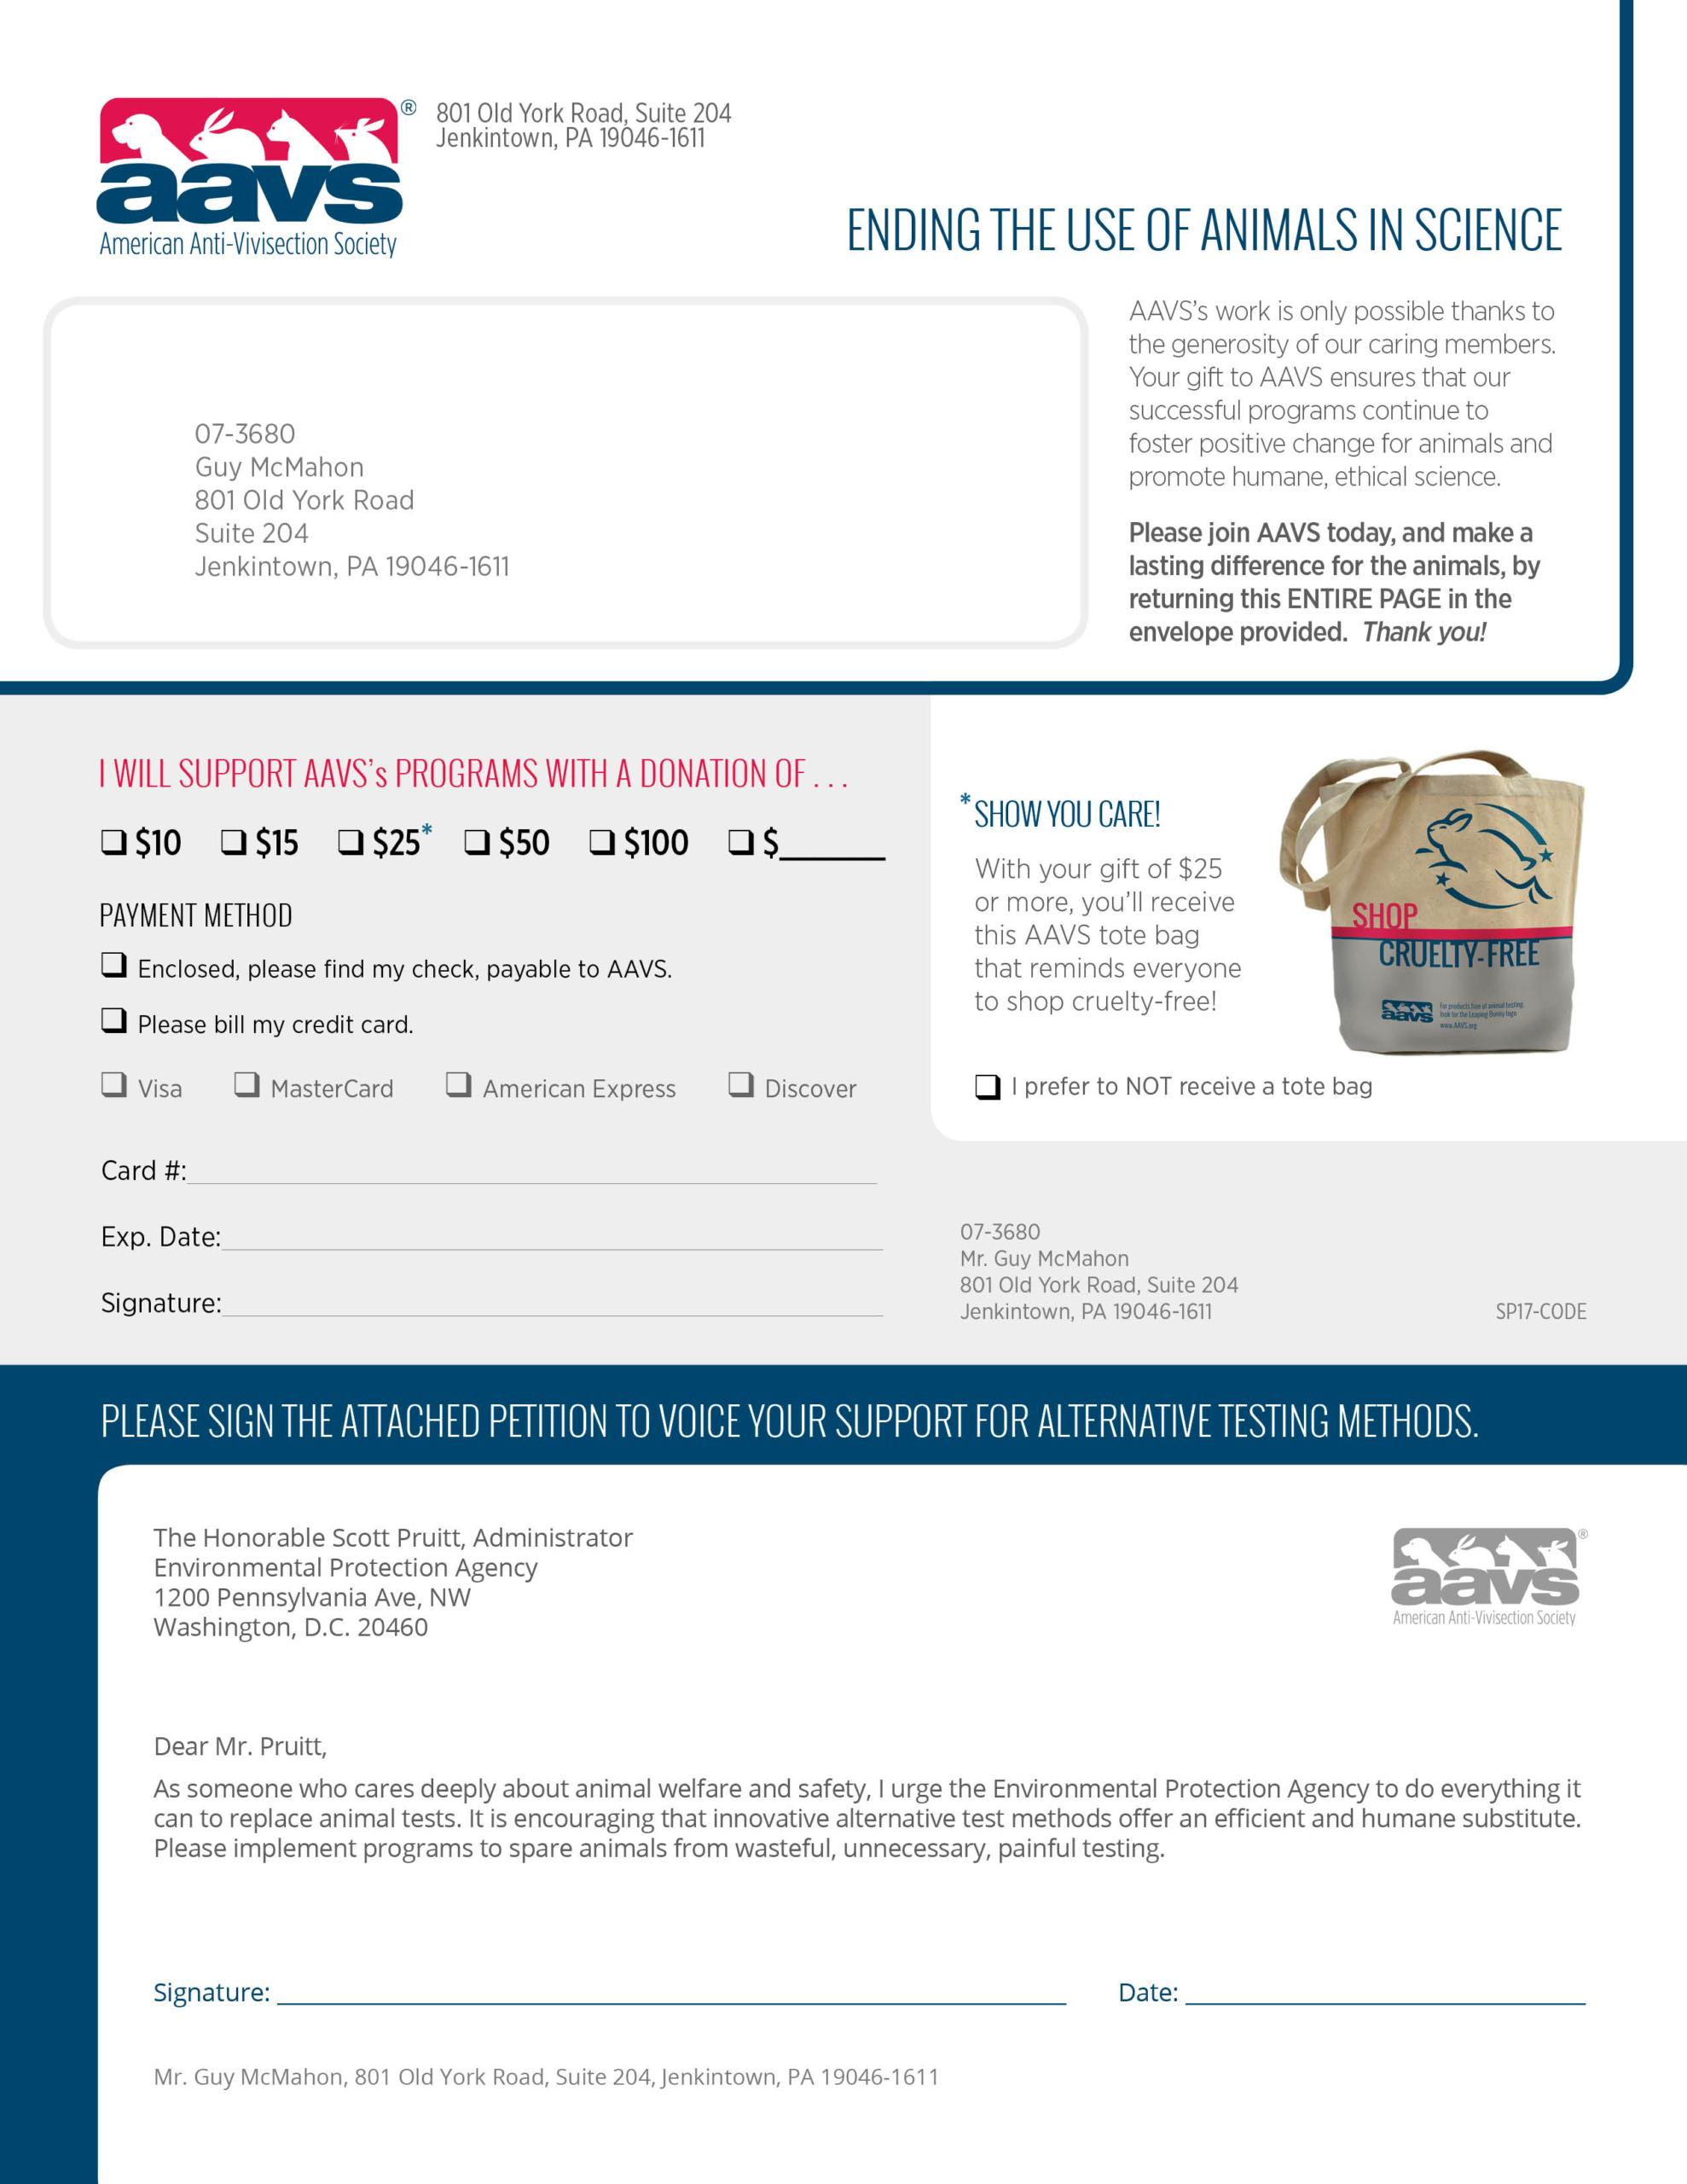 AAVS - Acquisition Mailing Package (Alternatives) - Response Device Front